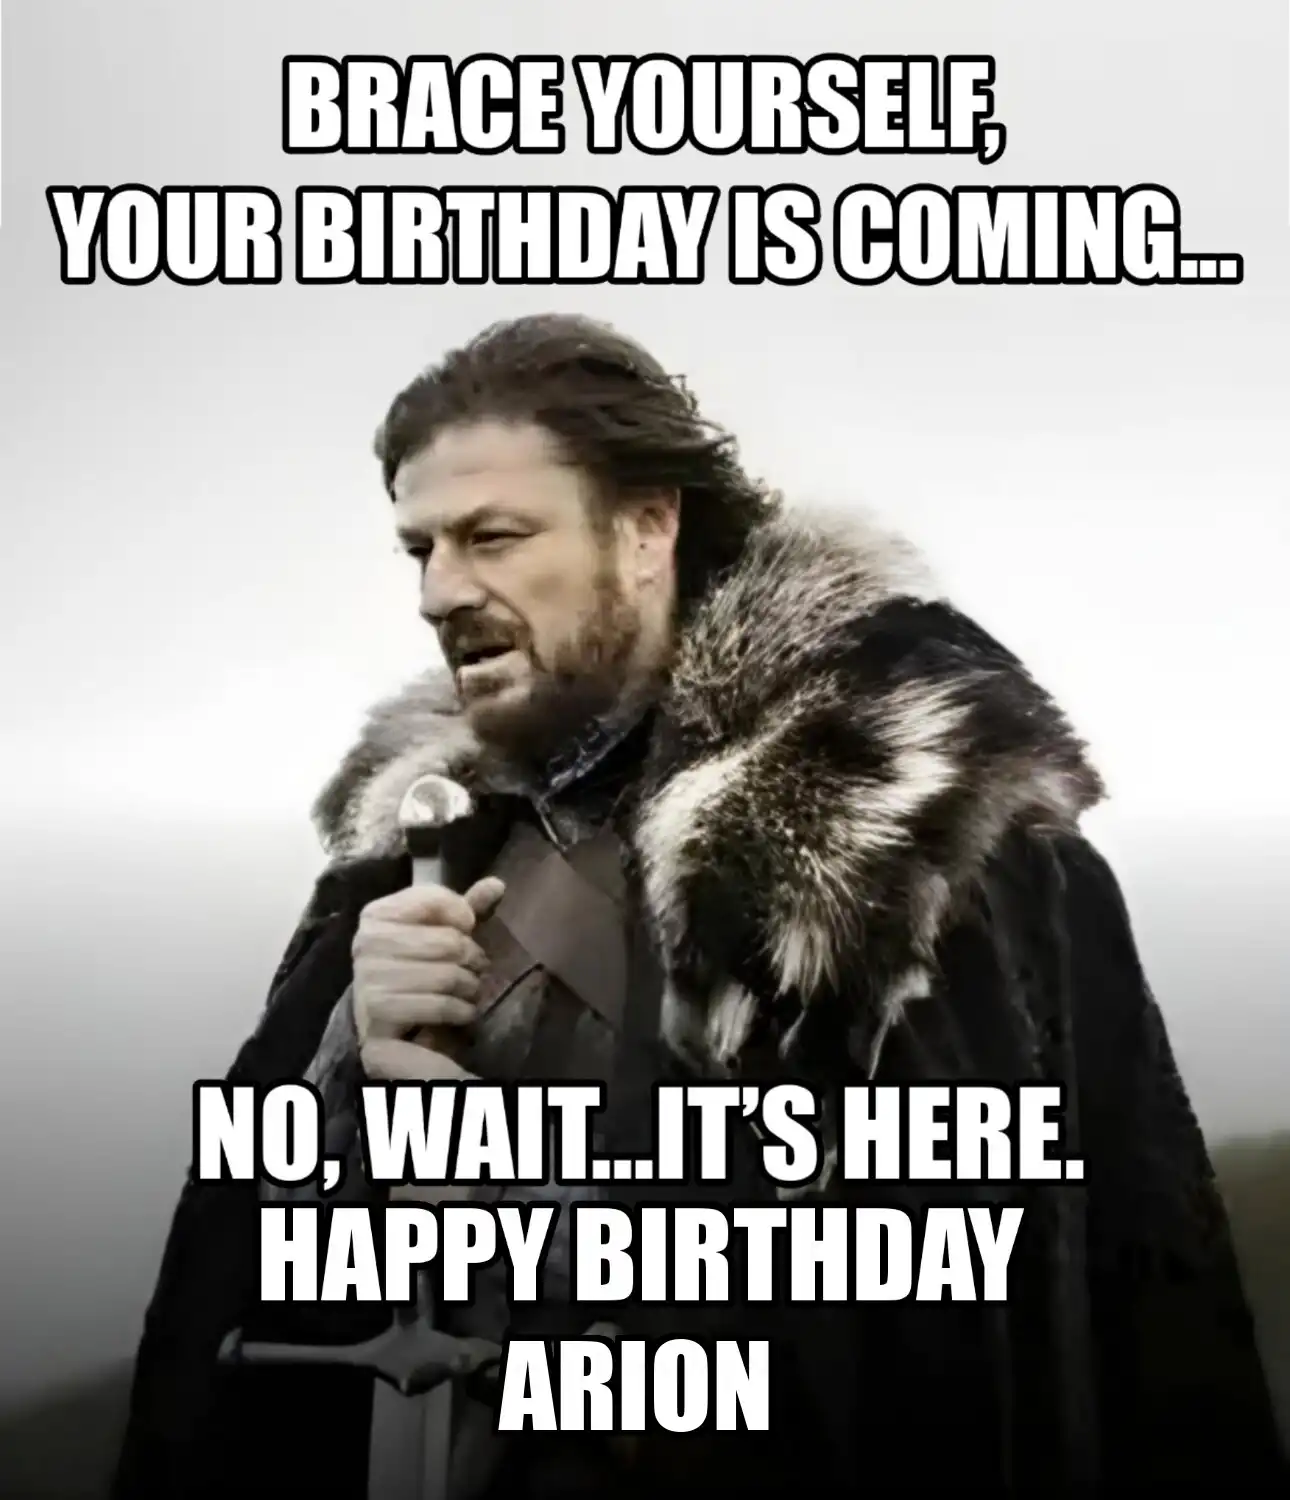 Happy Birthday Arion Brace Yourself Your Birthday Is Coming Meme